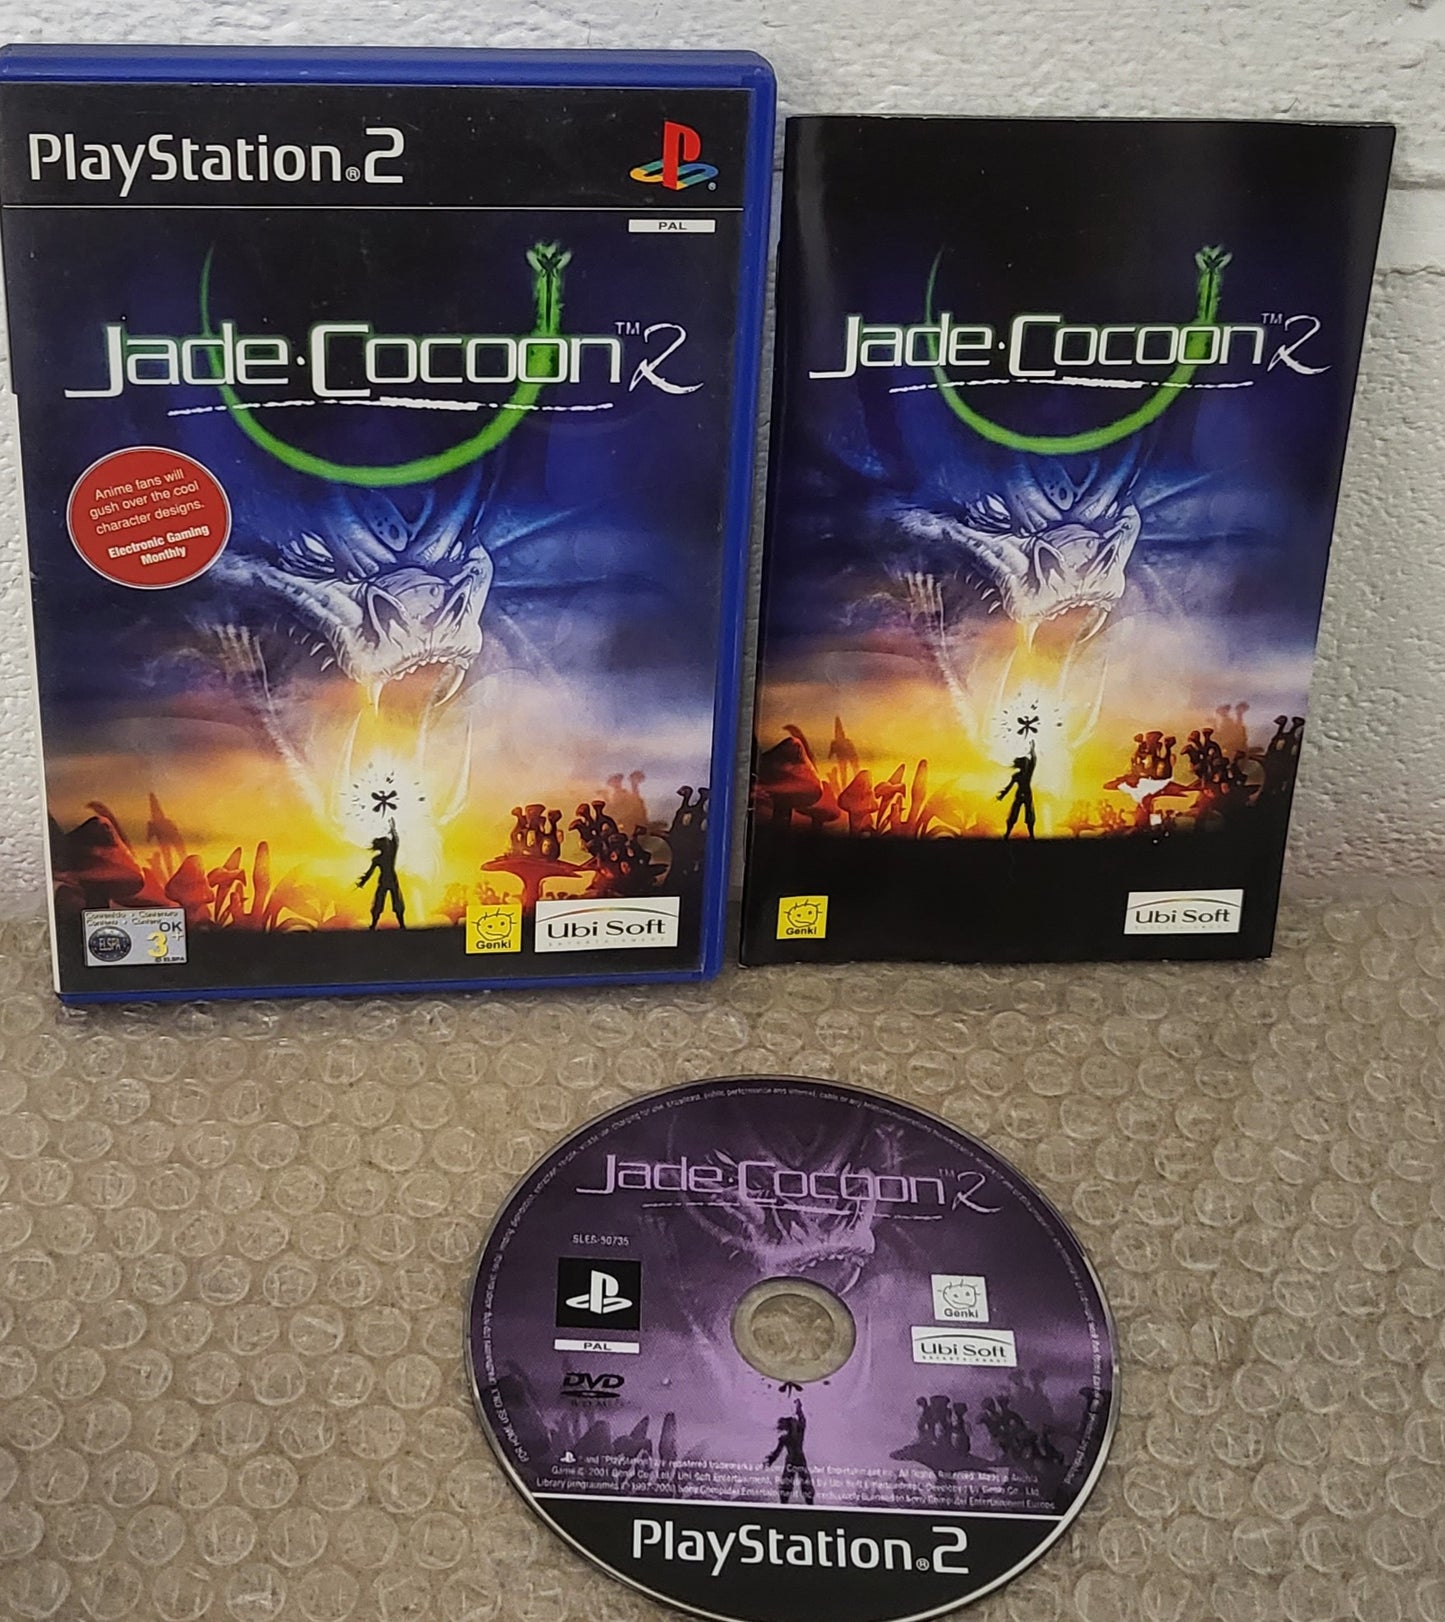 Jade Cocoon 2 Sony Playstation 2 (PS2) Game